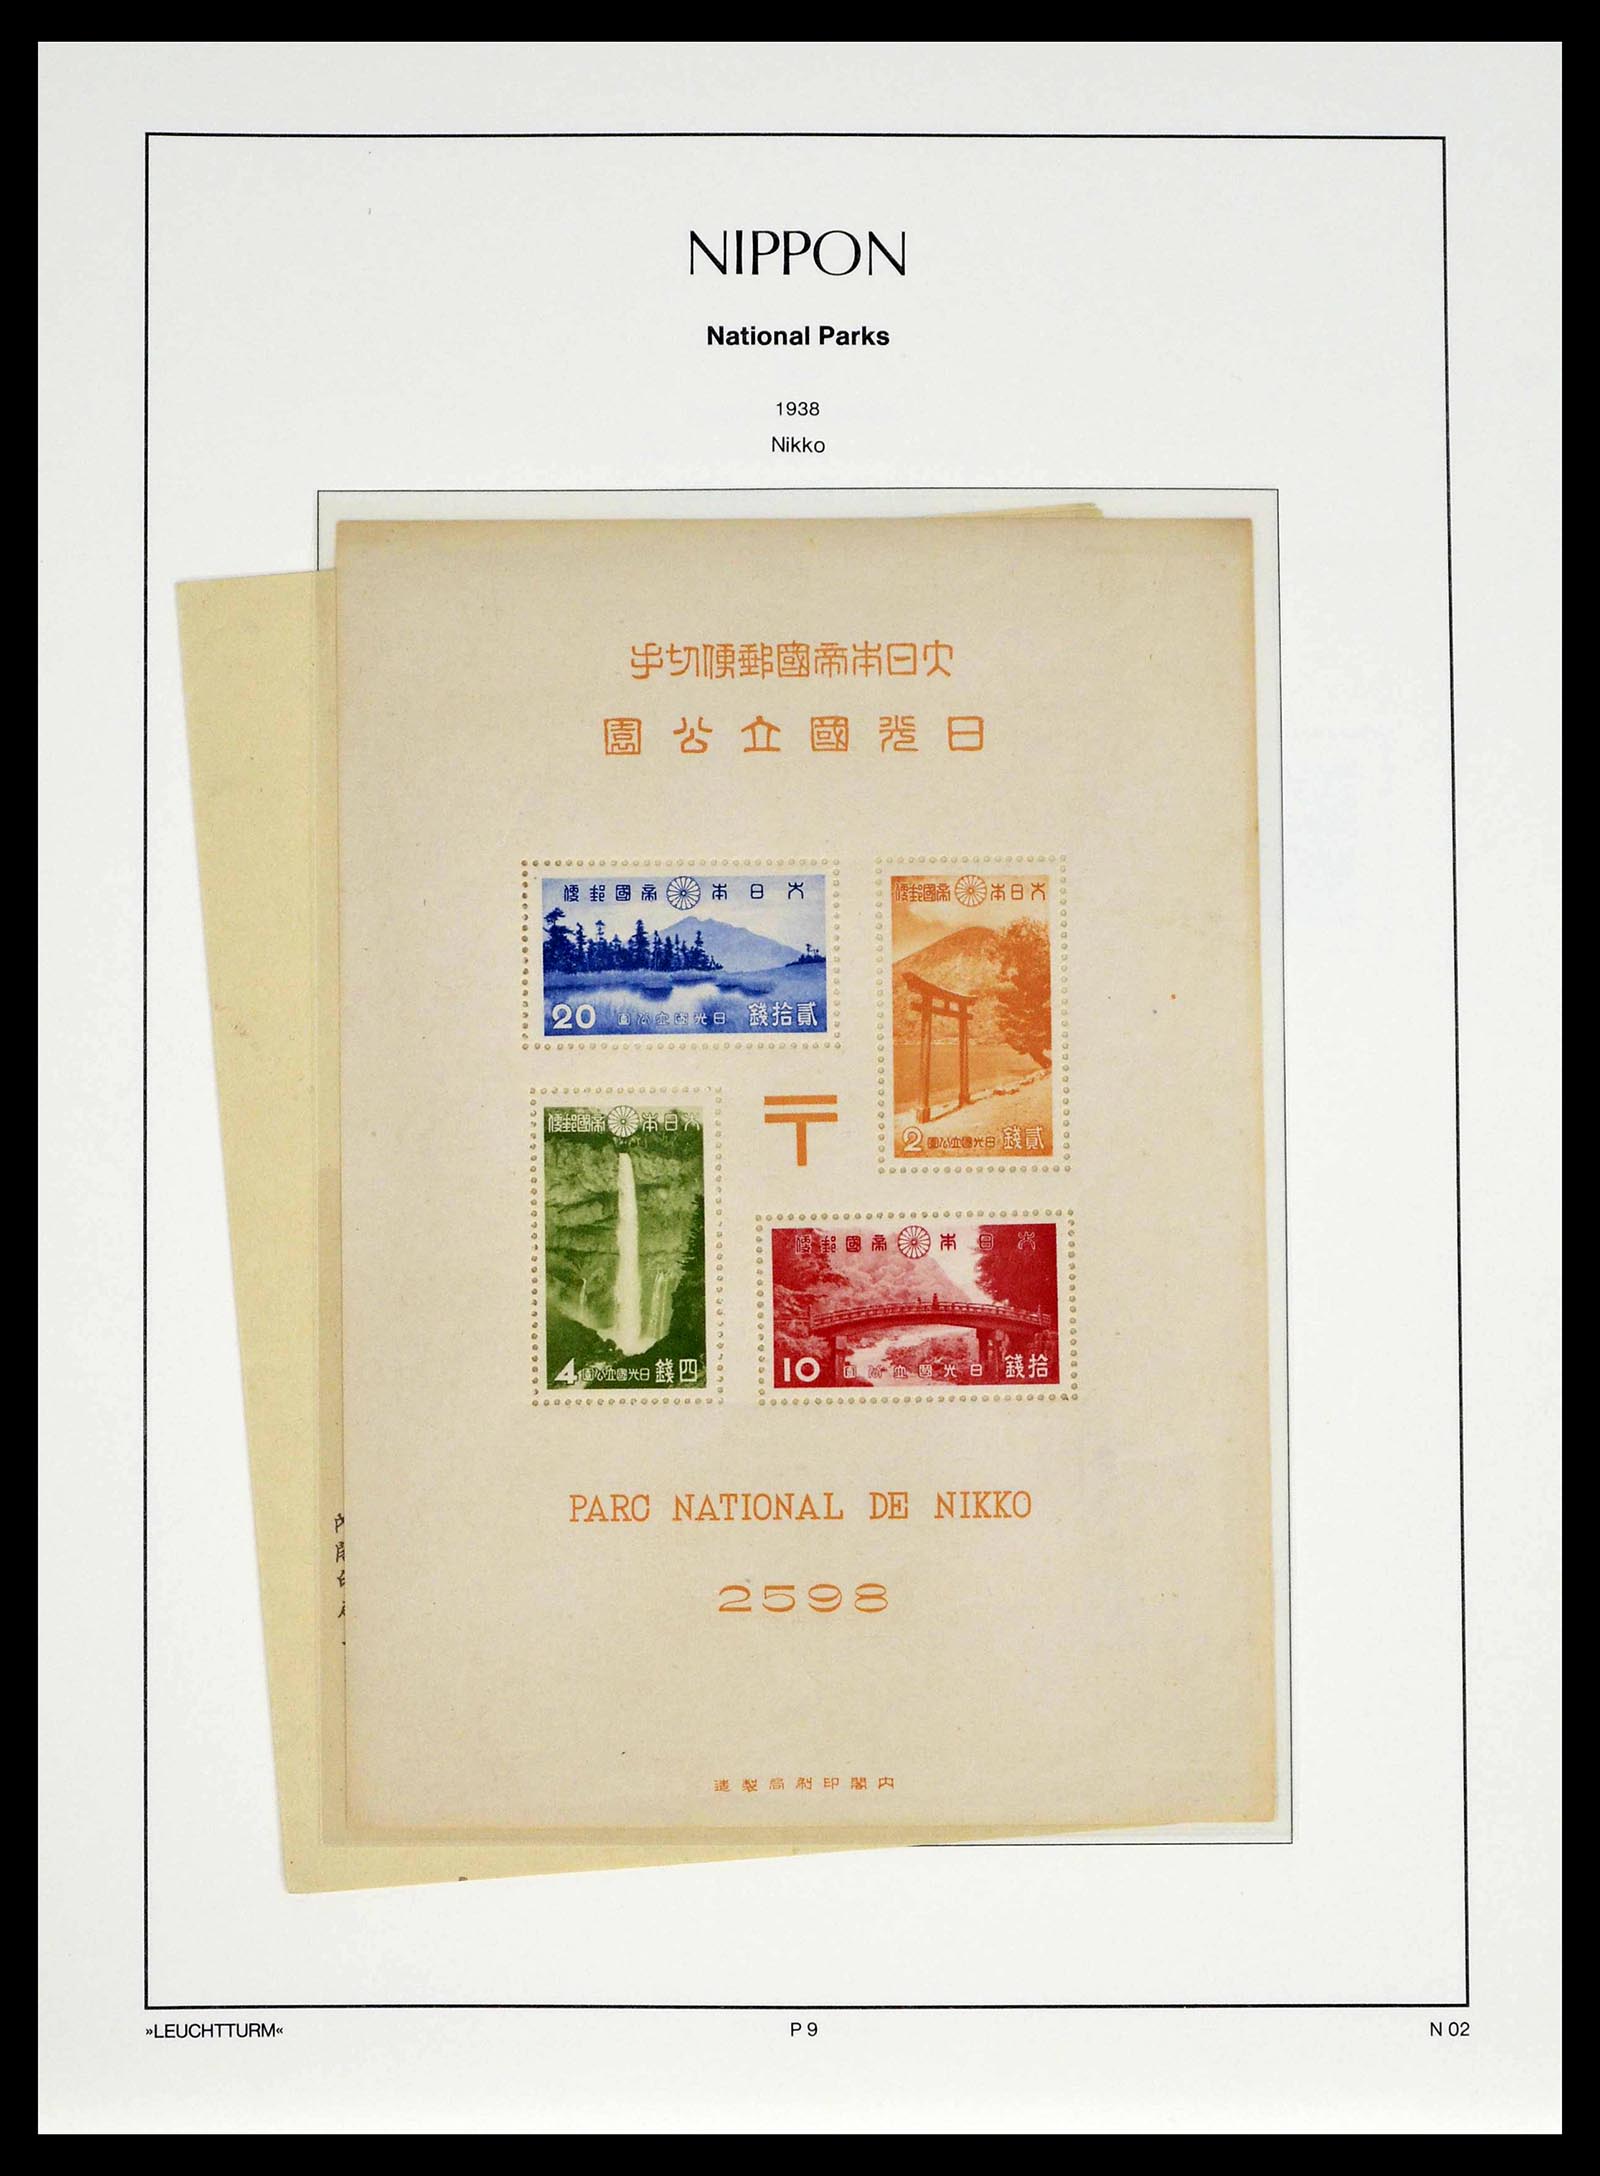 39382 0039 - Stamp collection 39382 Japan 1871-1941.